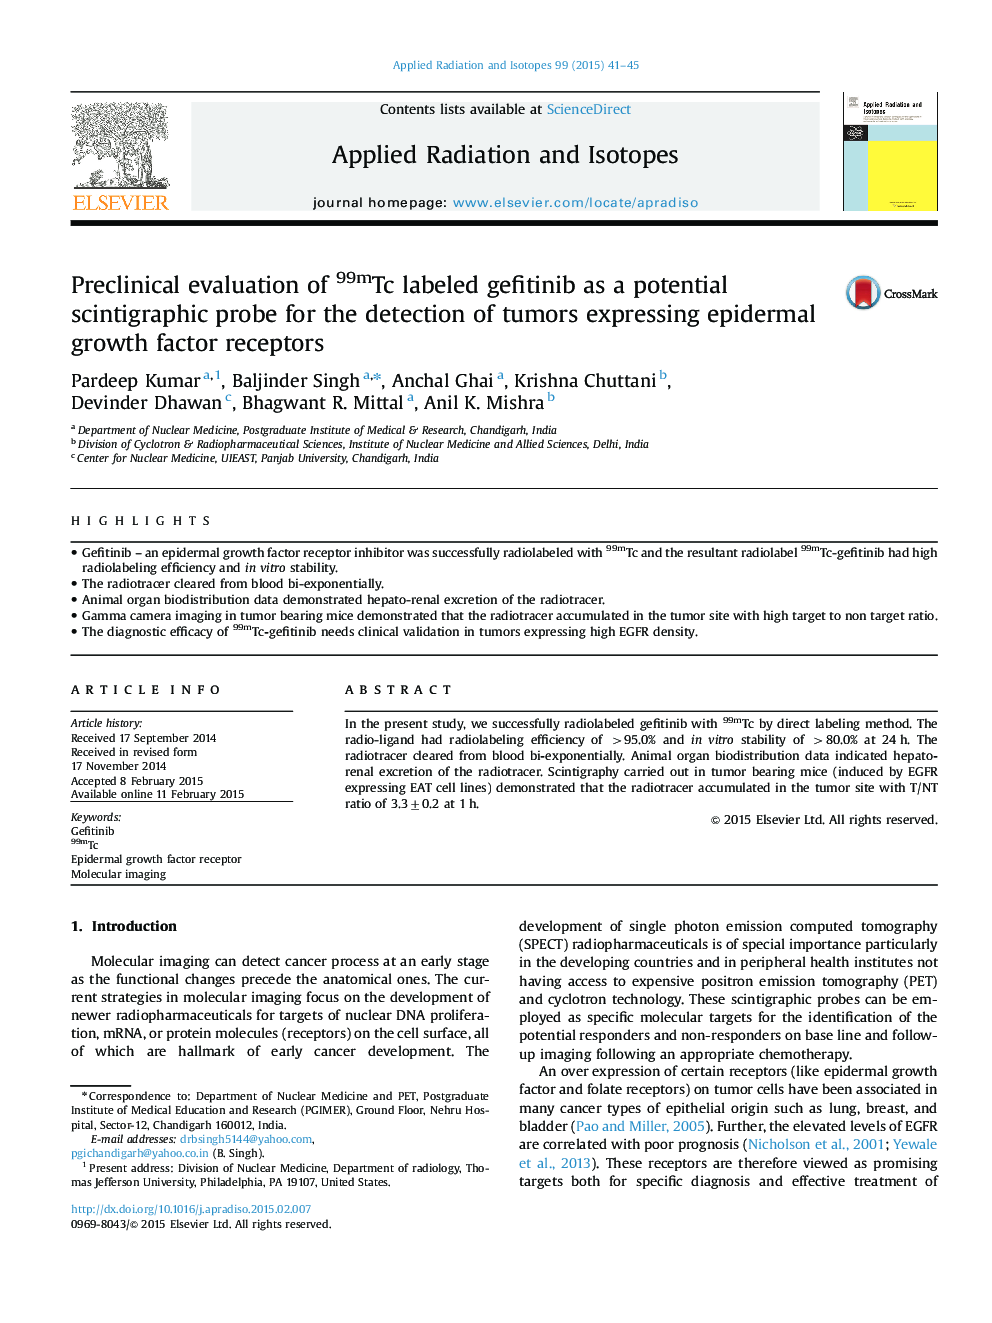 Preclinical evaluation of 99mTc labeled gefitinib as a potential scintigraphic probe for the detection of tumors expressing epidermal growth factor receptors